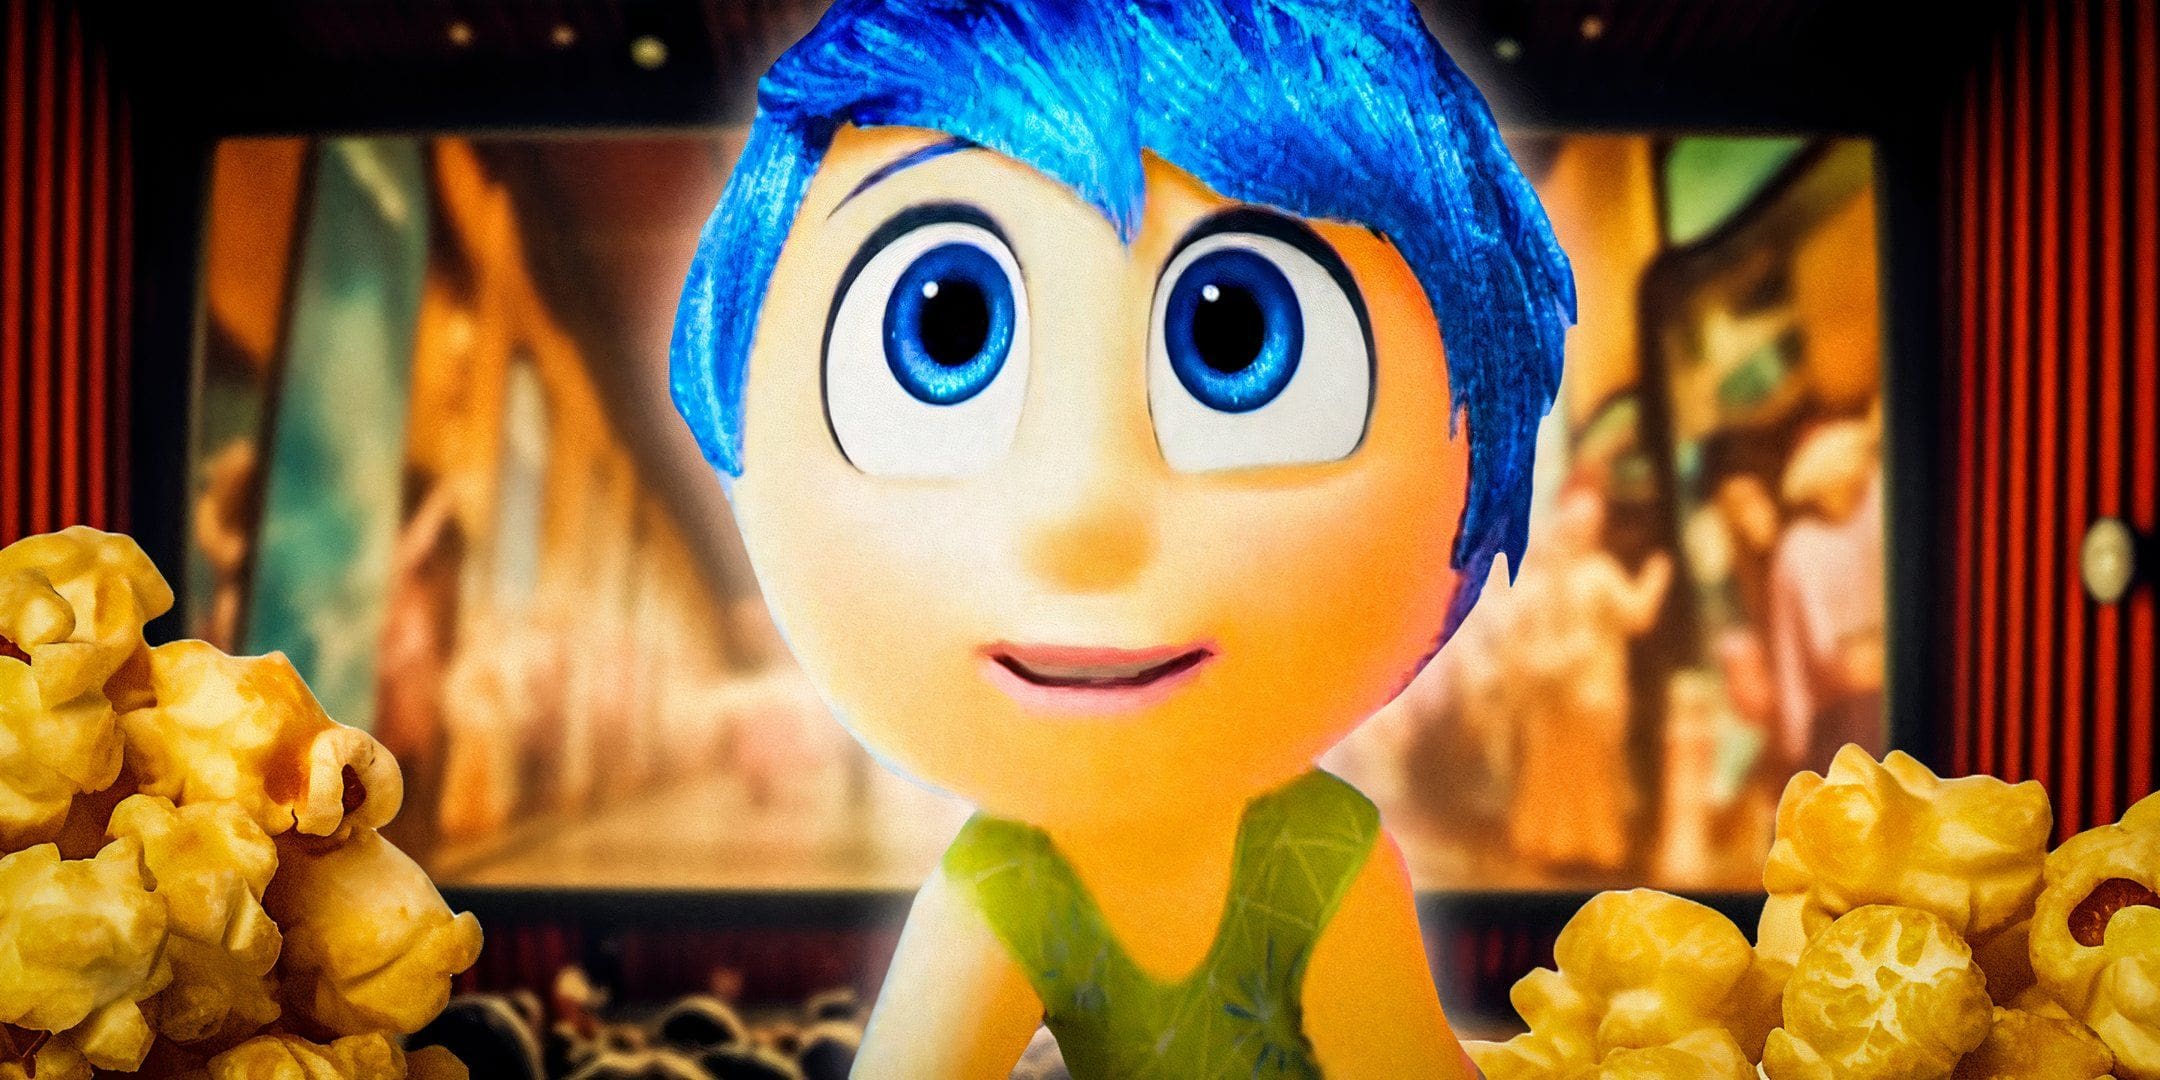 Inside Out 2 Thrives with a Deeper Look at Teen Emotions and Mental Health